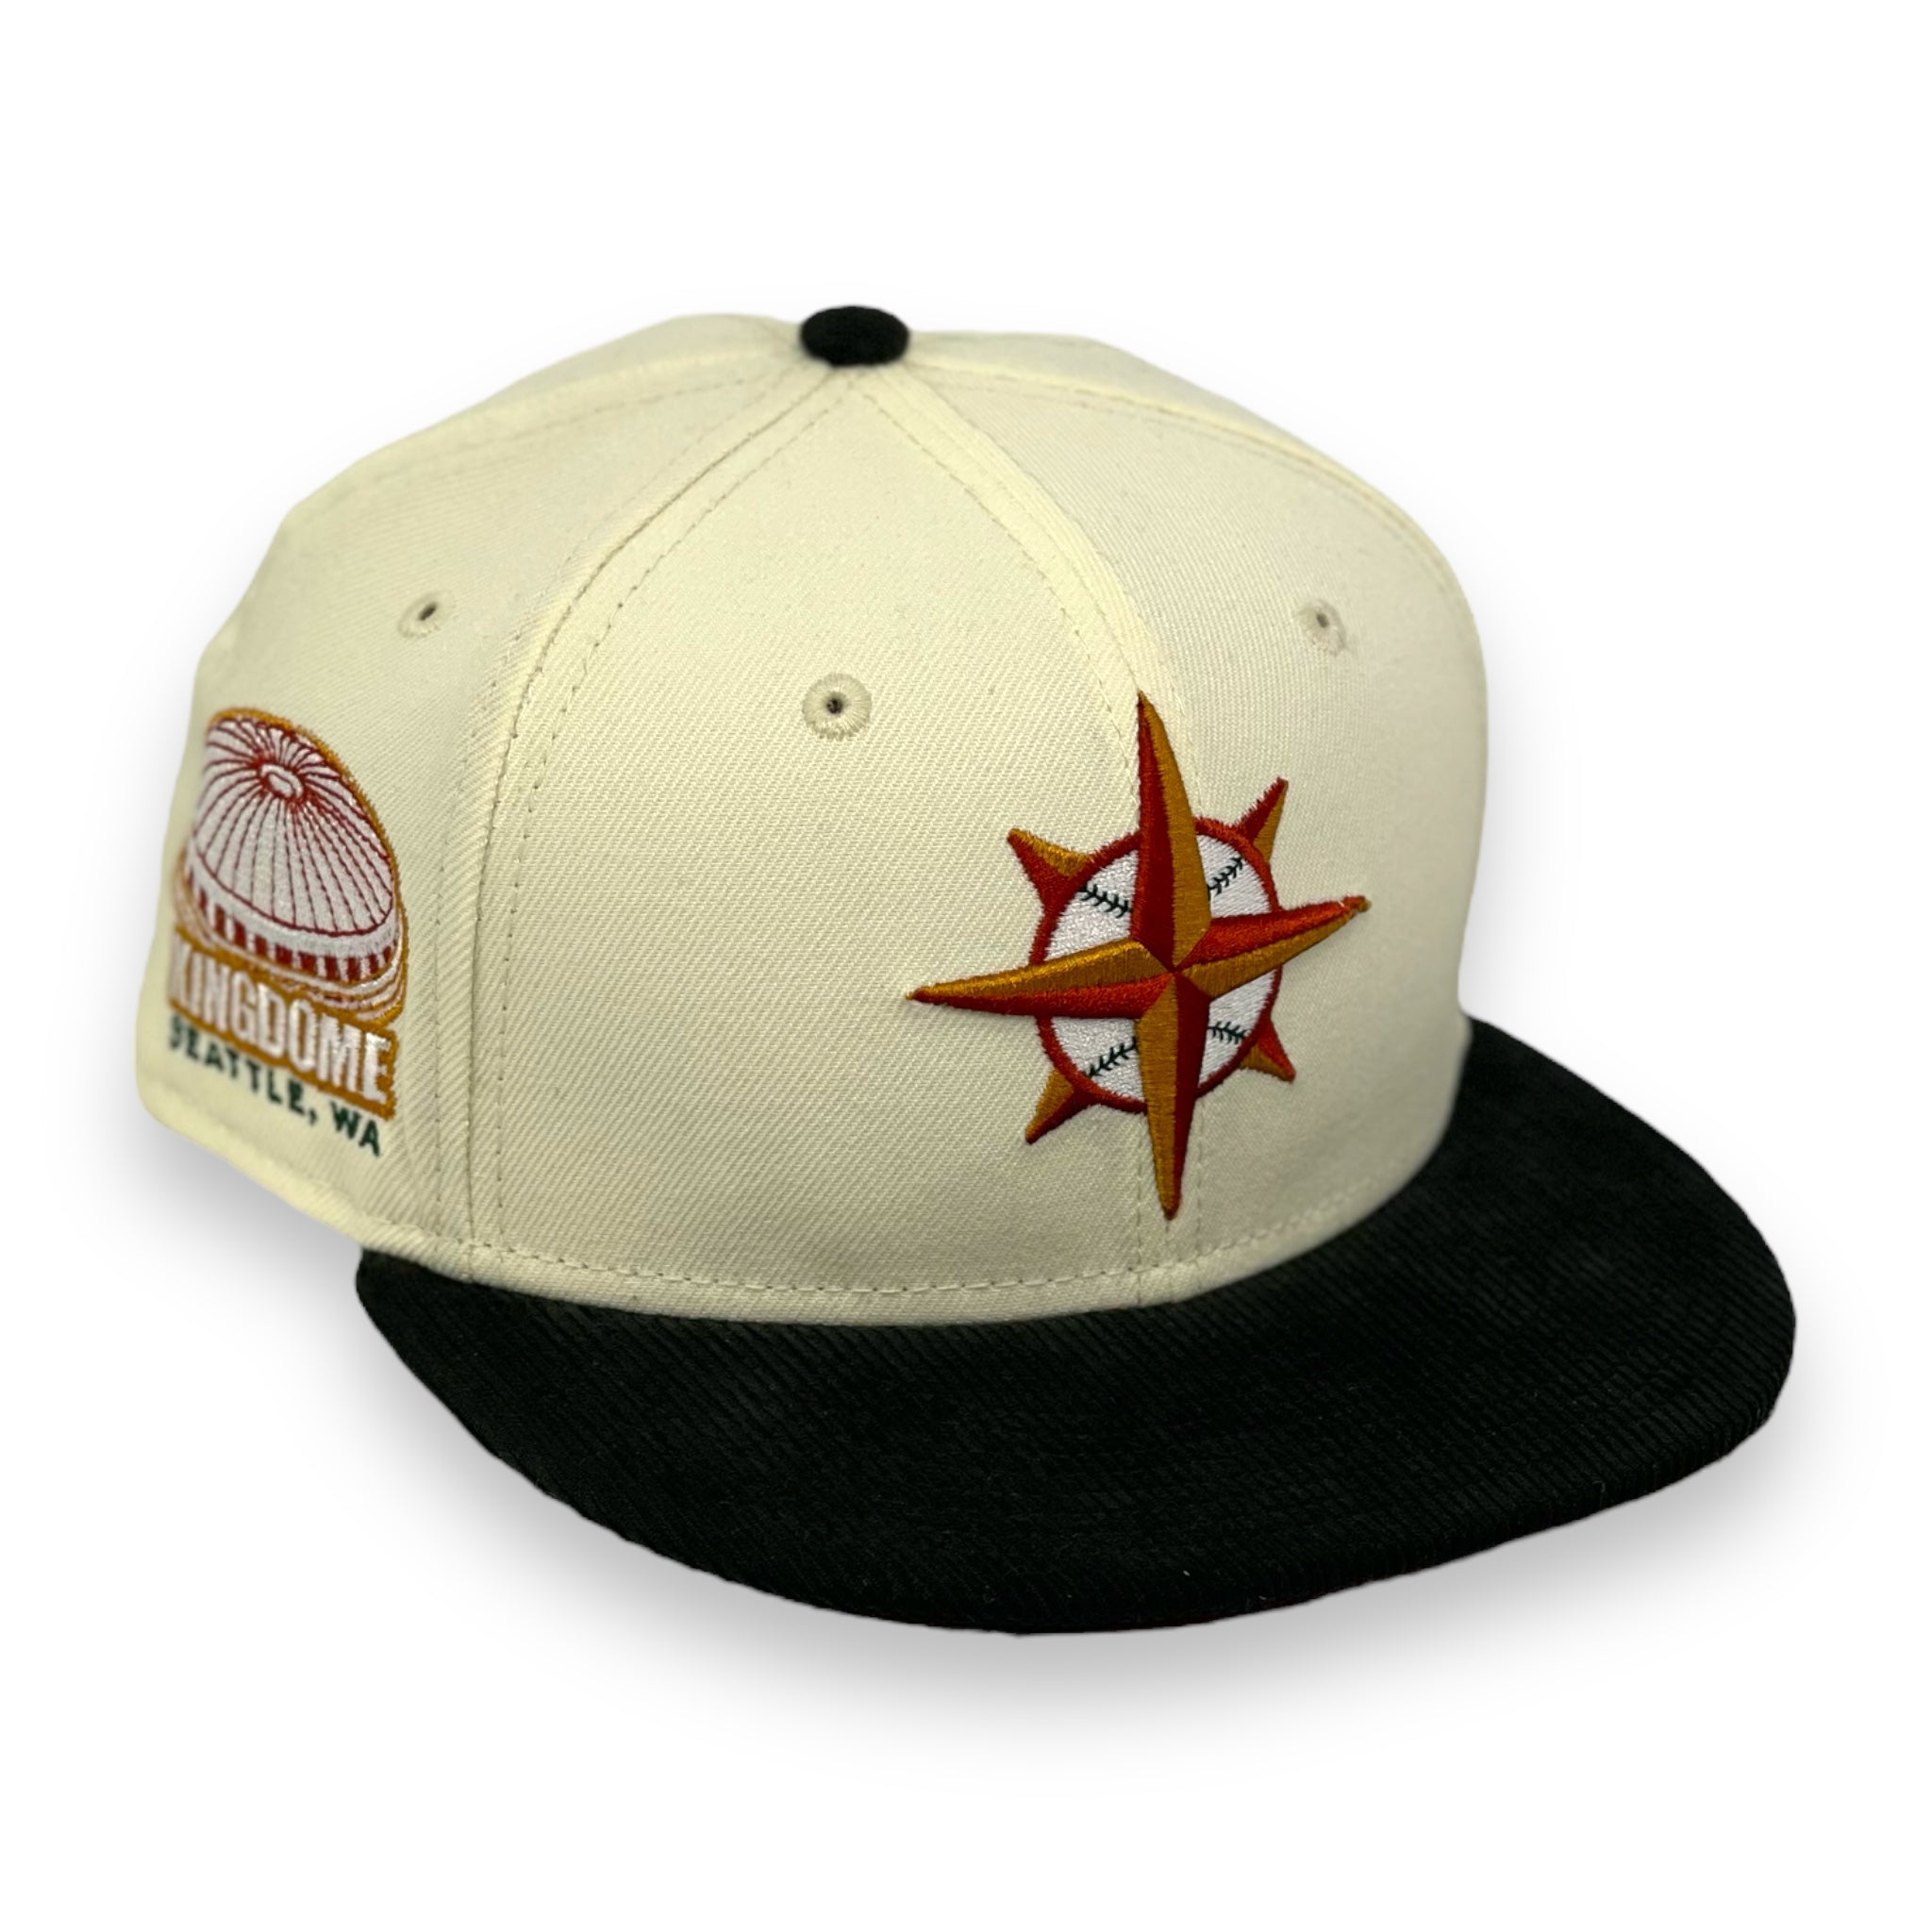 SEATTLE MARINERS (OFF-WHITE) KINGDOME NEW ERA 59FIFTY FITTED (RED UNDER VISOR)